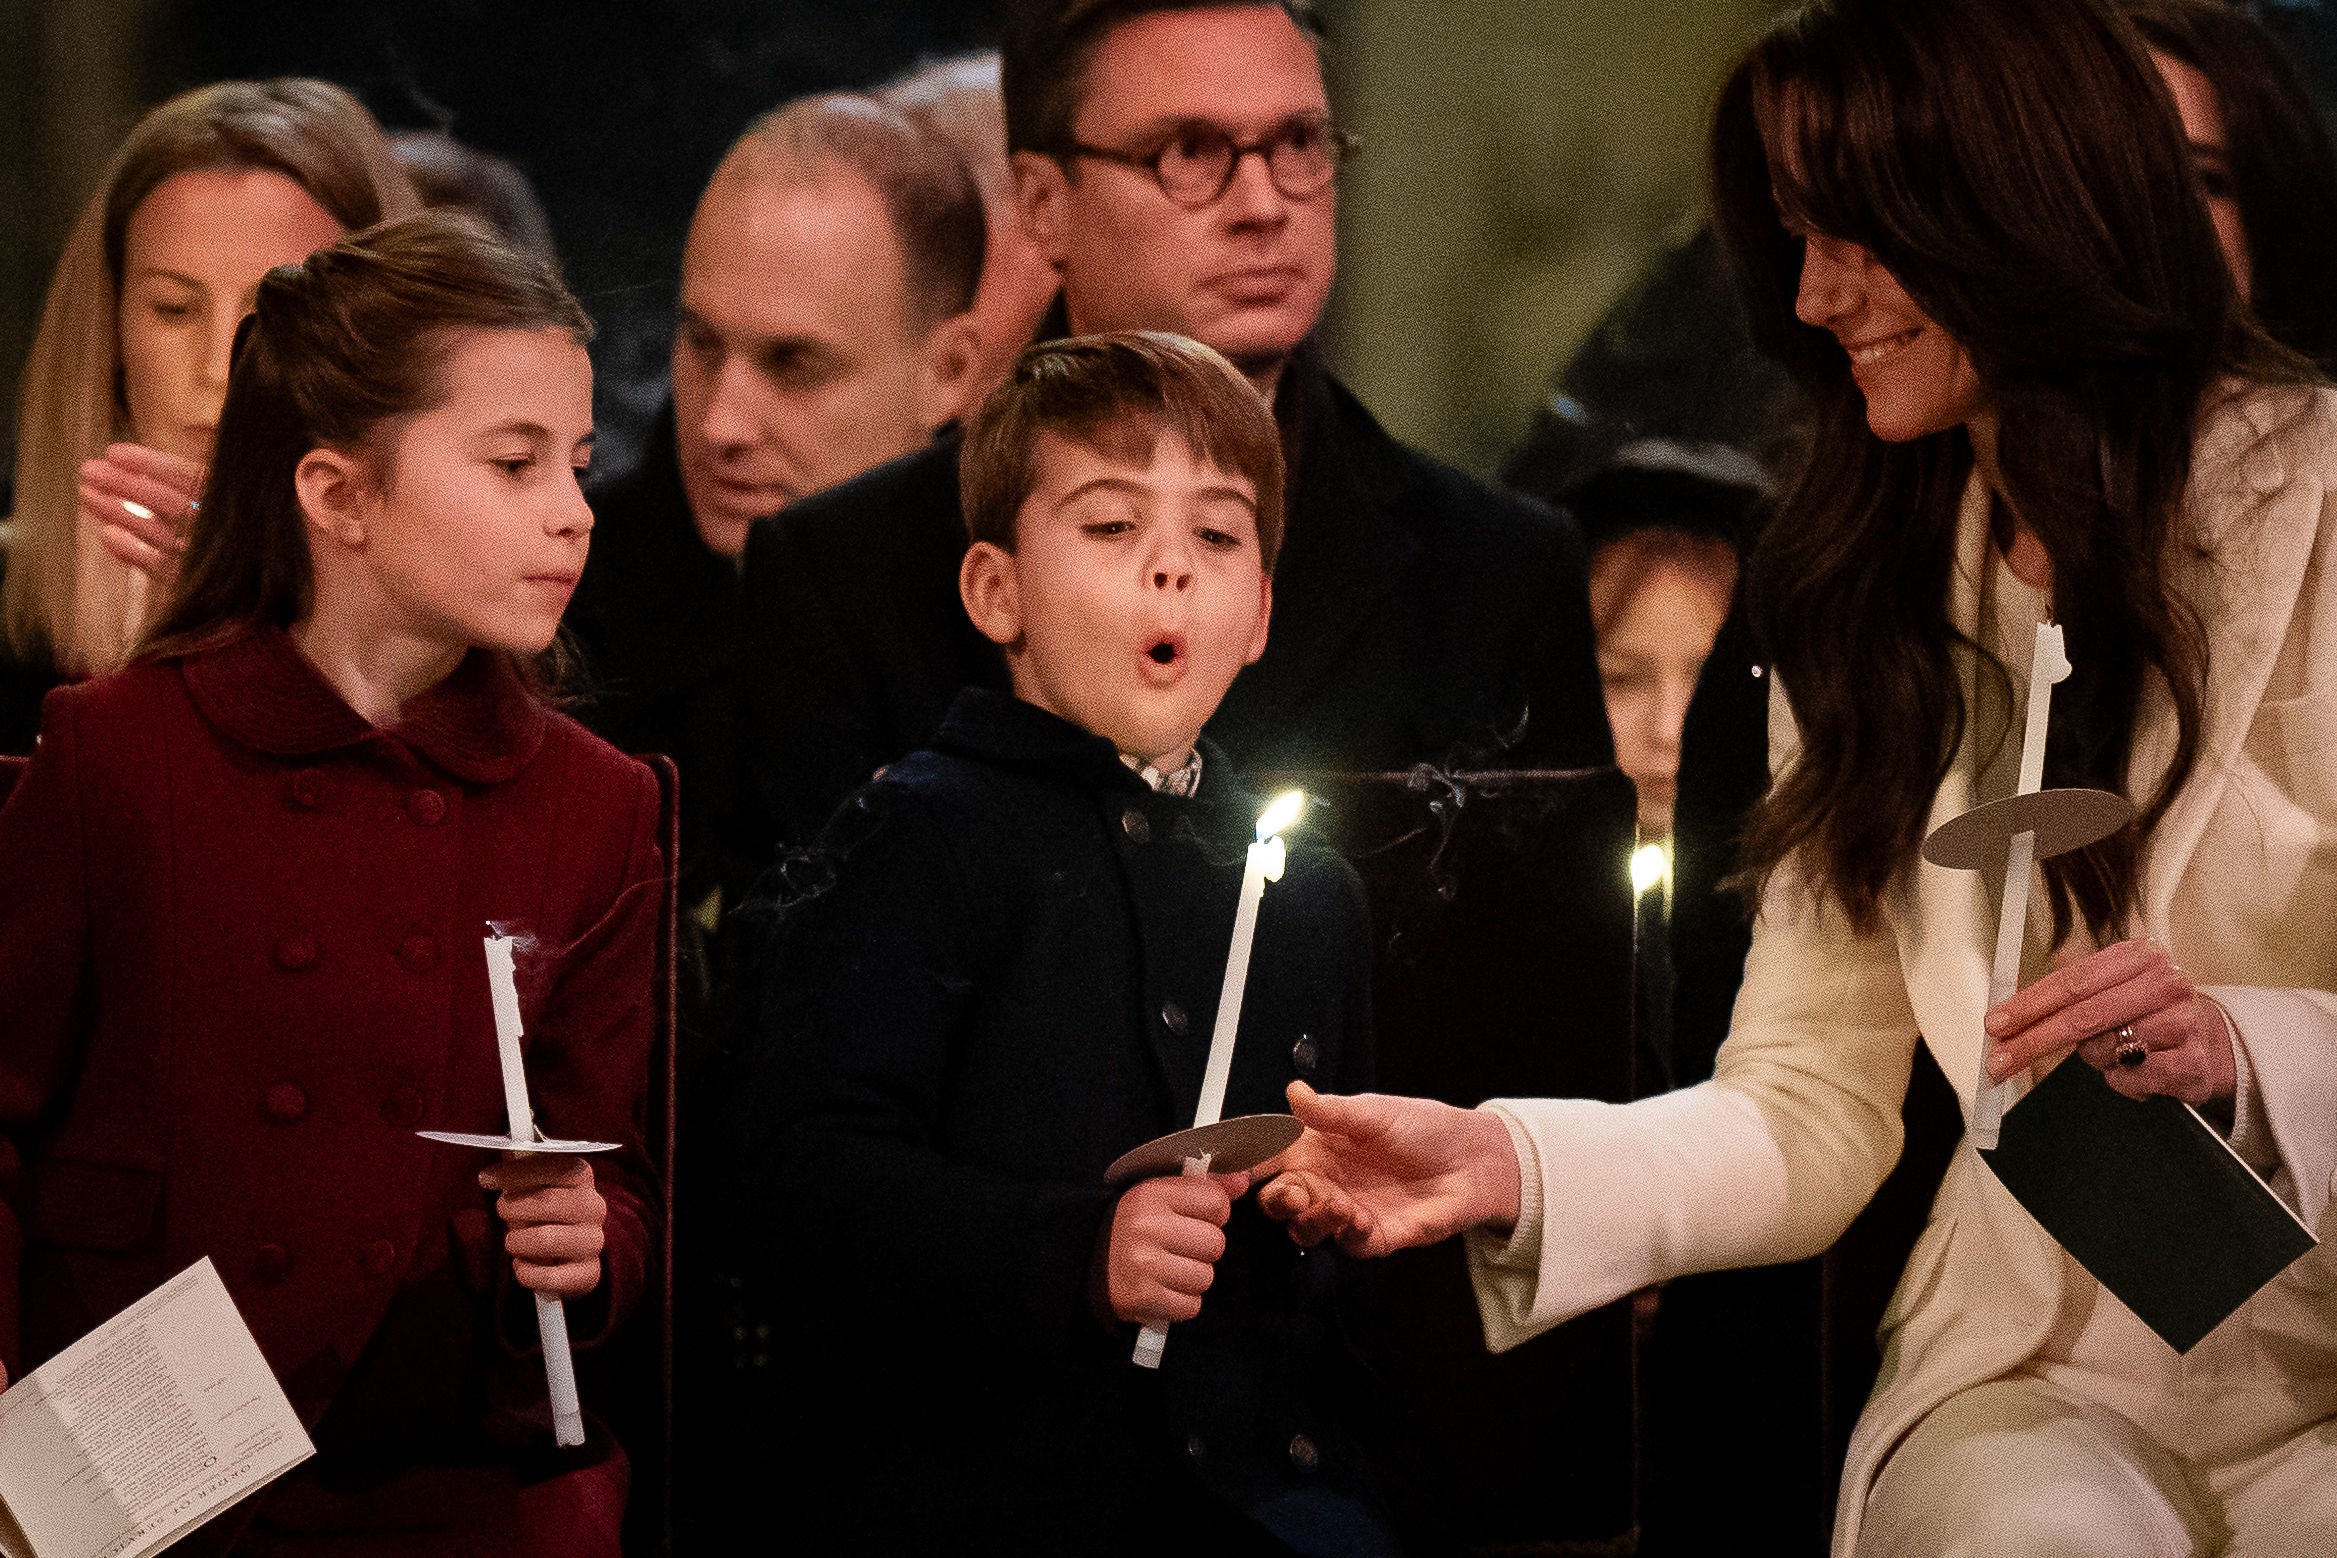 Prince Louis attempts to blow out his candle as the Princess of Wales watches on